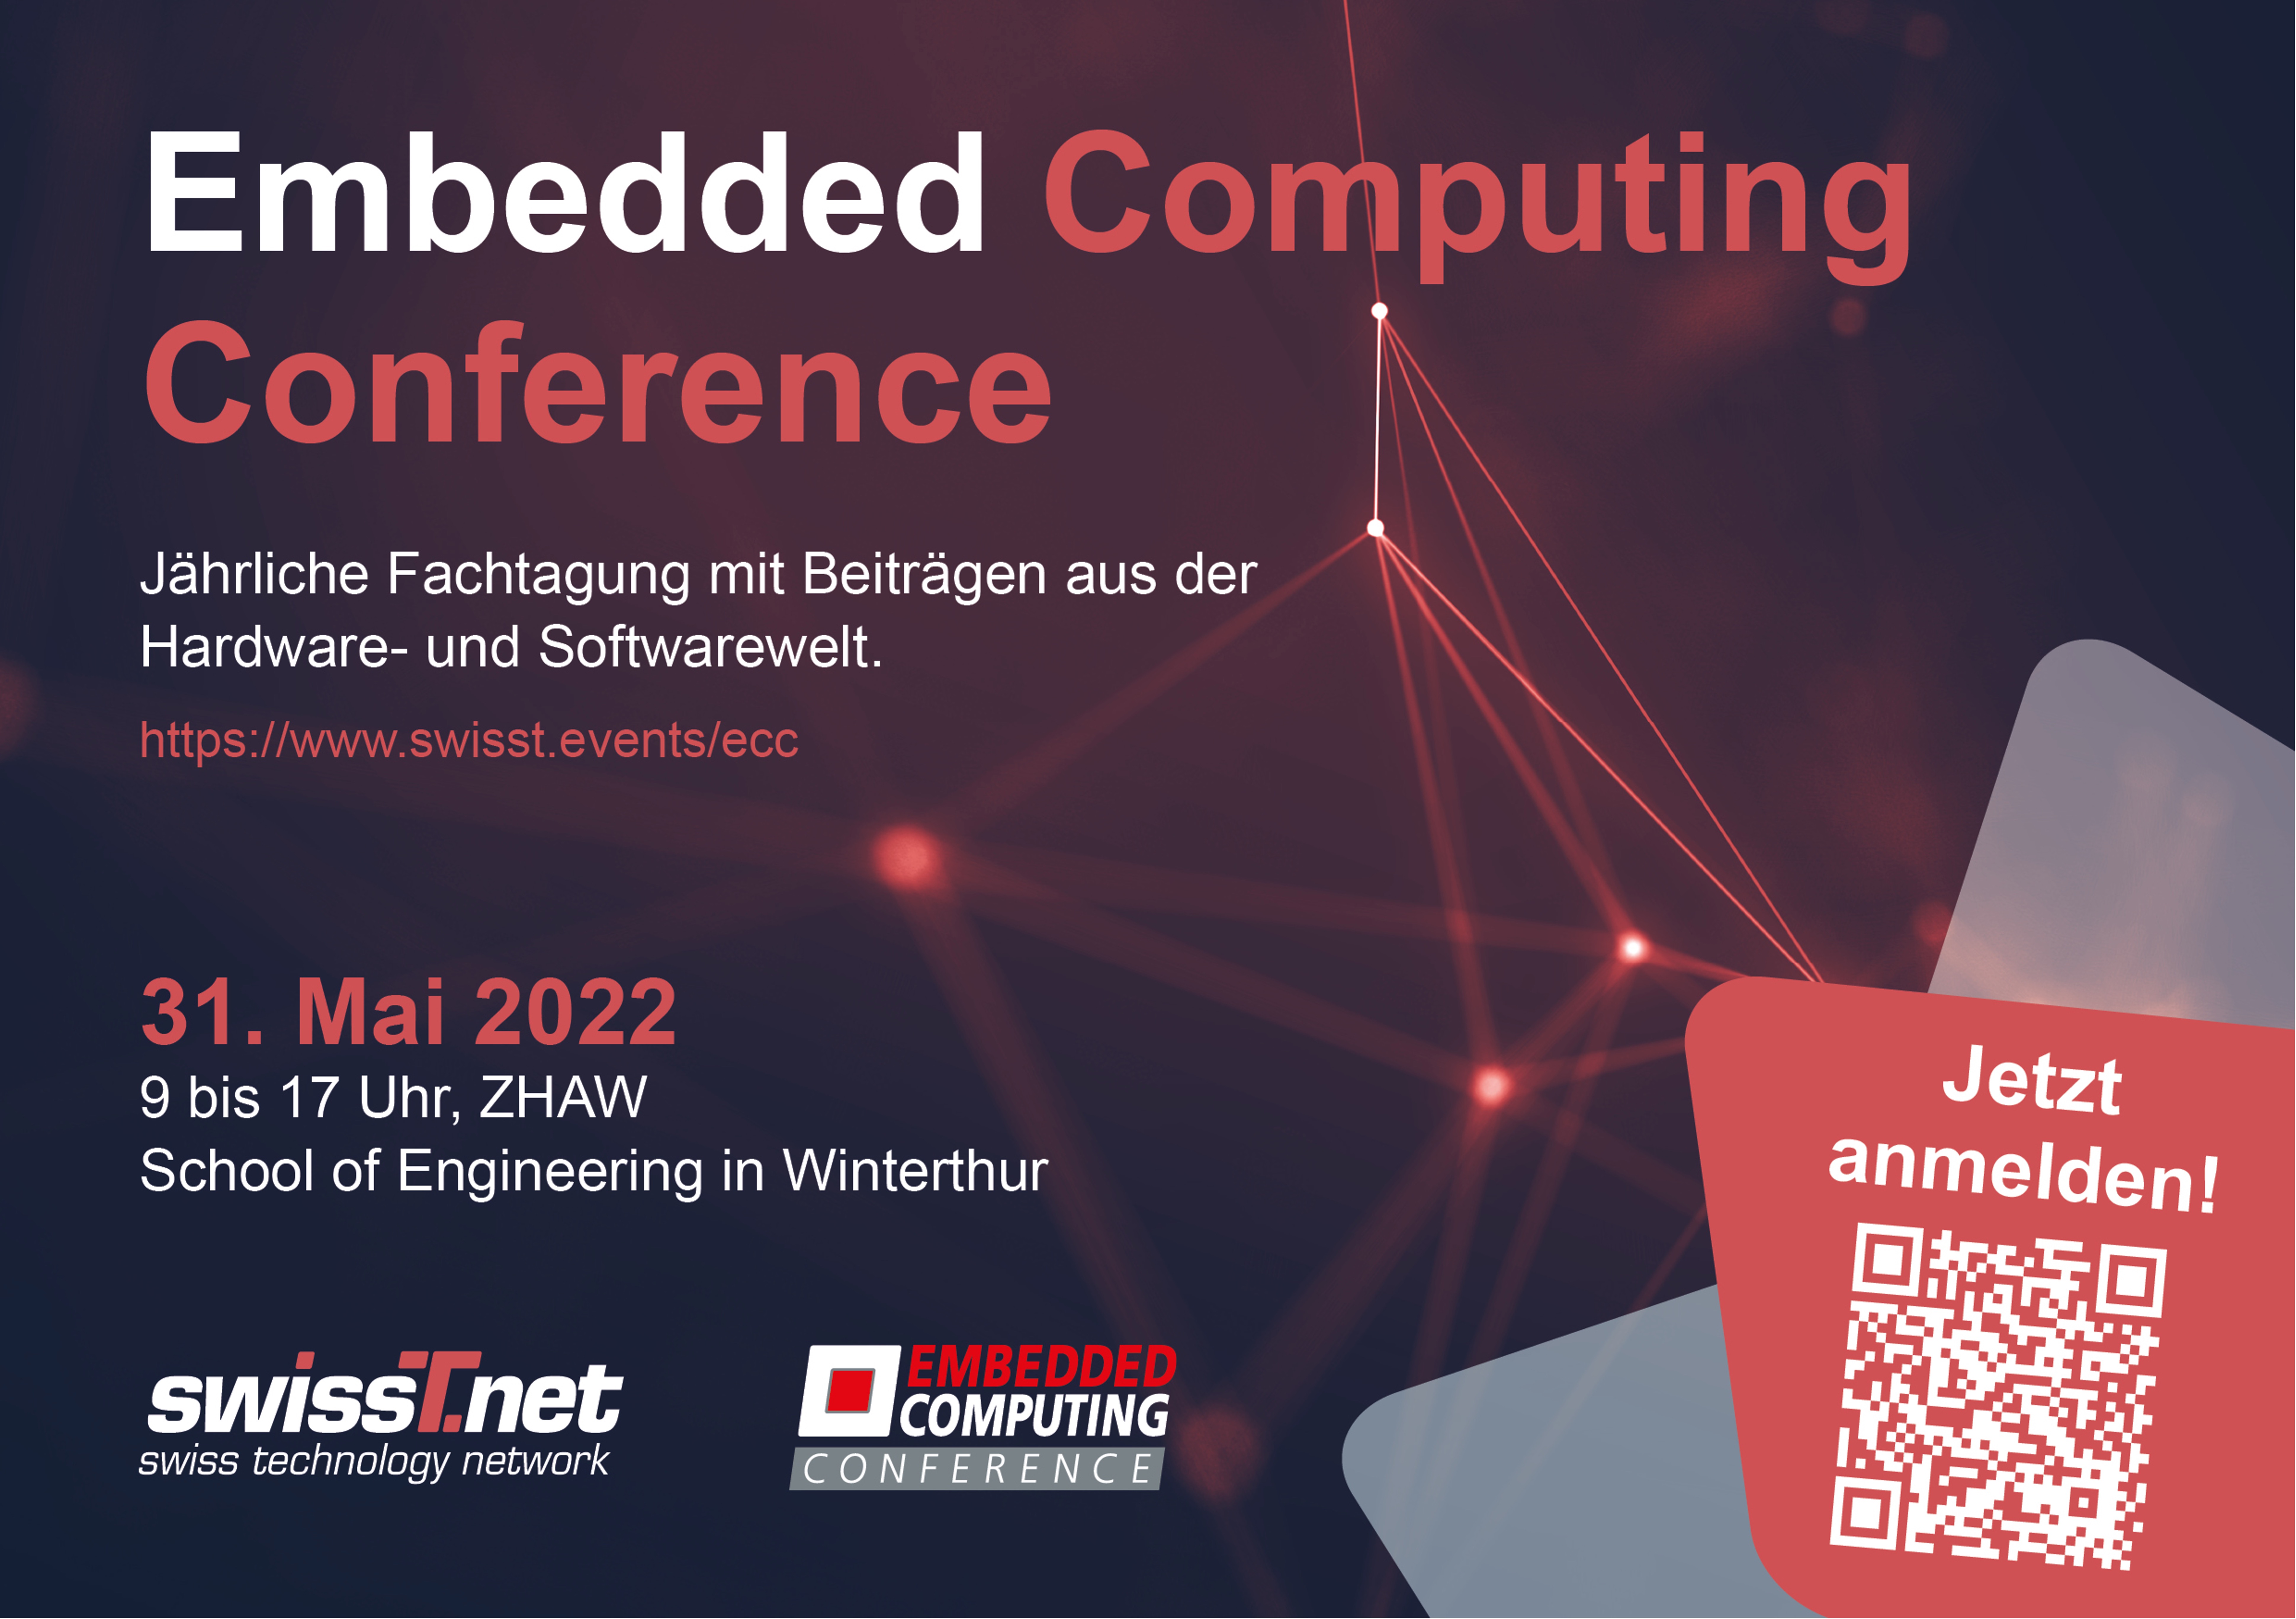 Flyer for the Embedded Computing Conference (ECC)